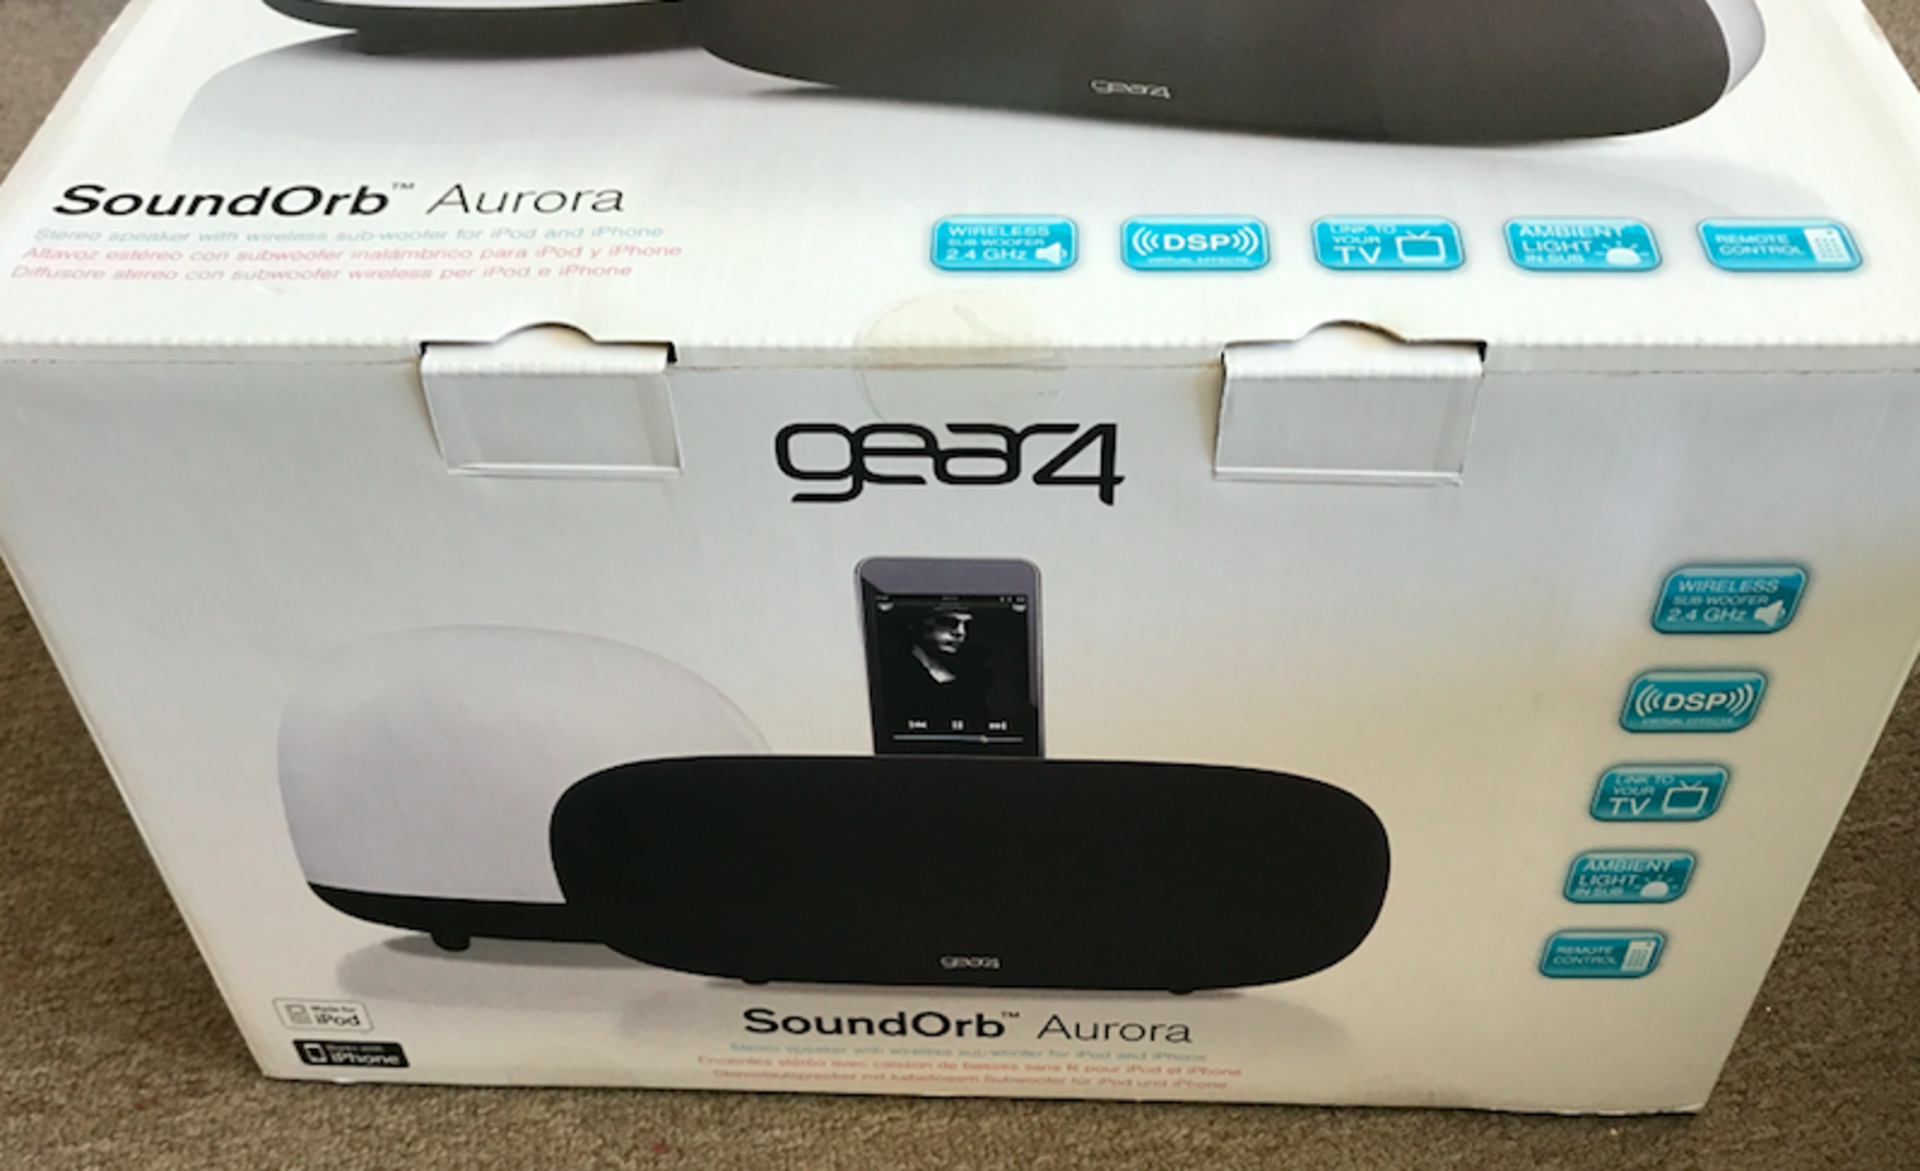 LOT OF TWO GEAR4 SOUND ORB AURORA MUSIC SYSTEM'S - Image 3 of 3